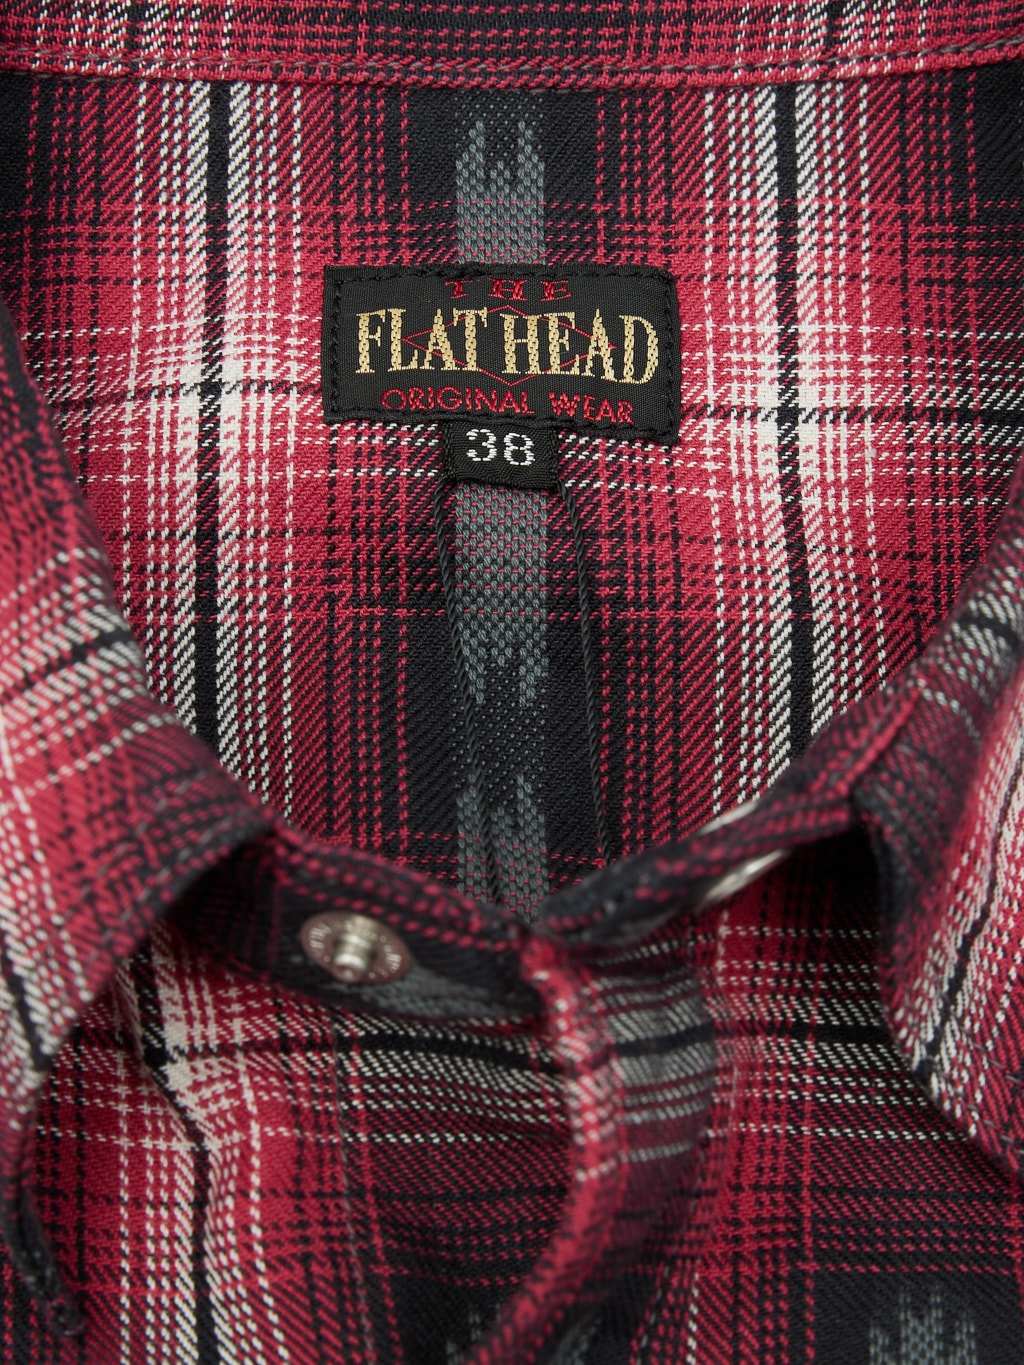 The Flat Head Native Check Western Shirt Red brand tag